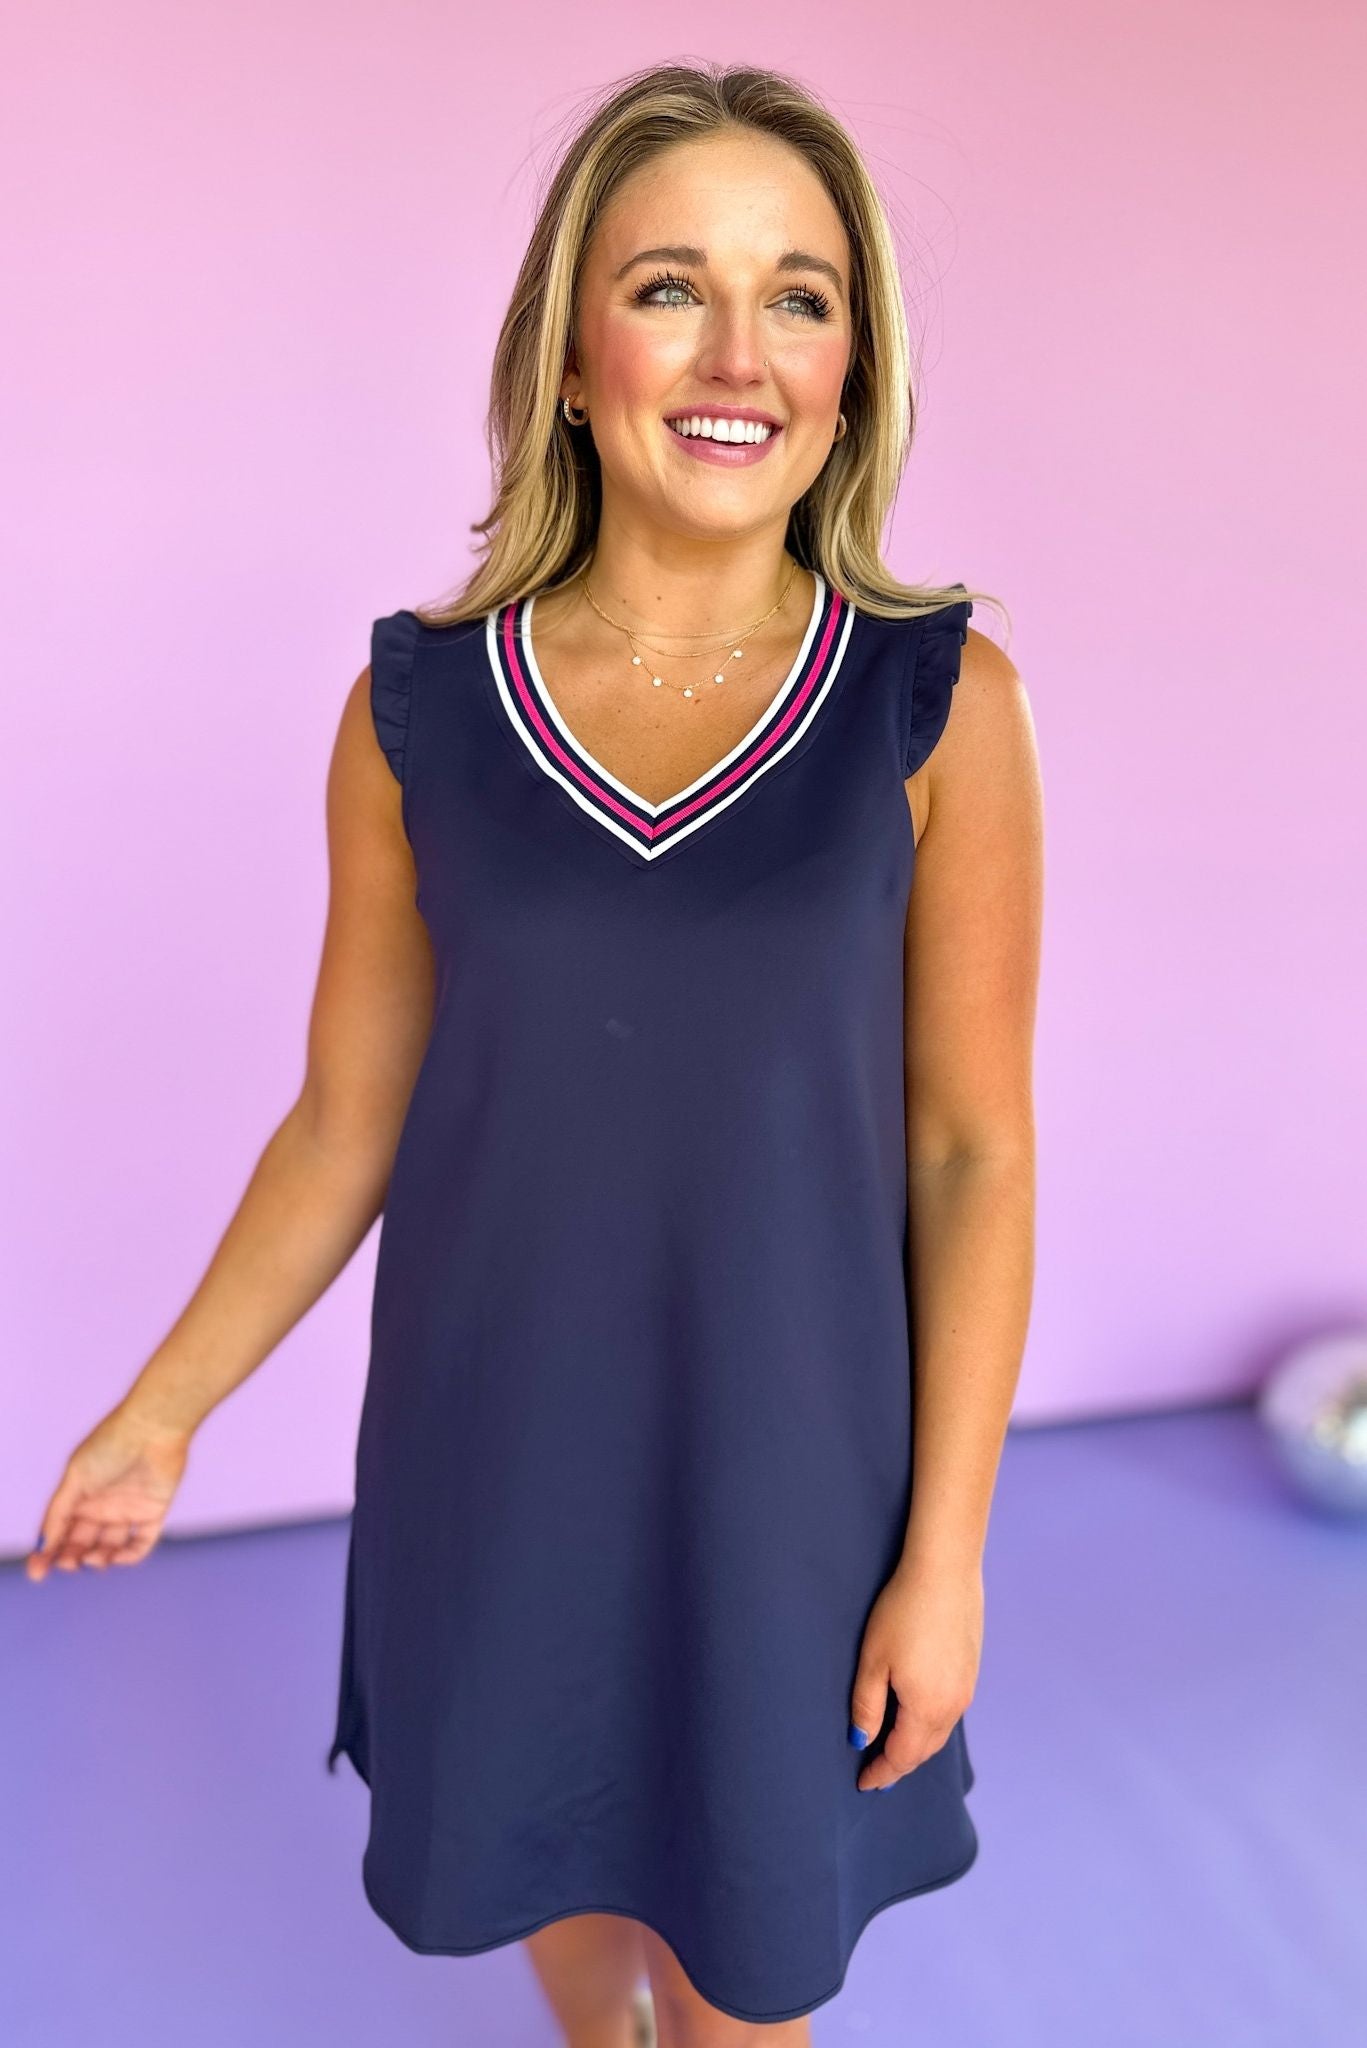 SSYS Navy Scuba V Neck Active Dress With White Navy and Pink Stripe Trim, ruffle sleeve, v neck, easy fit, summer dress, must have, shop style your senses by mallory fitzsimmons